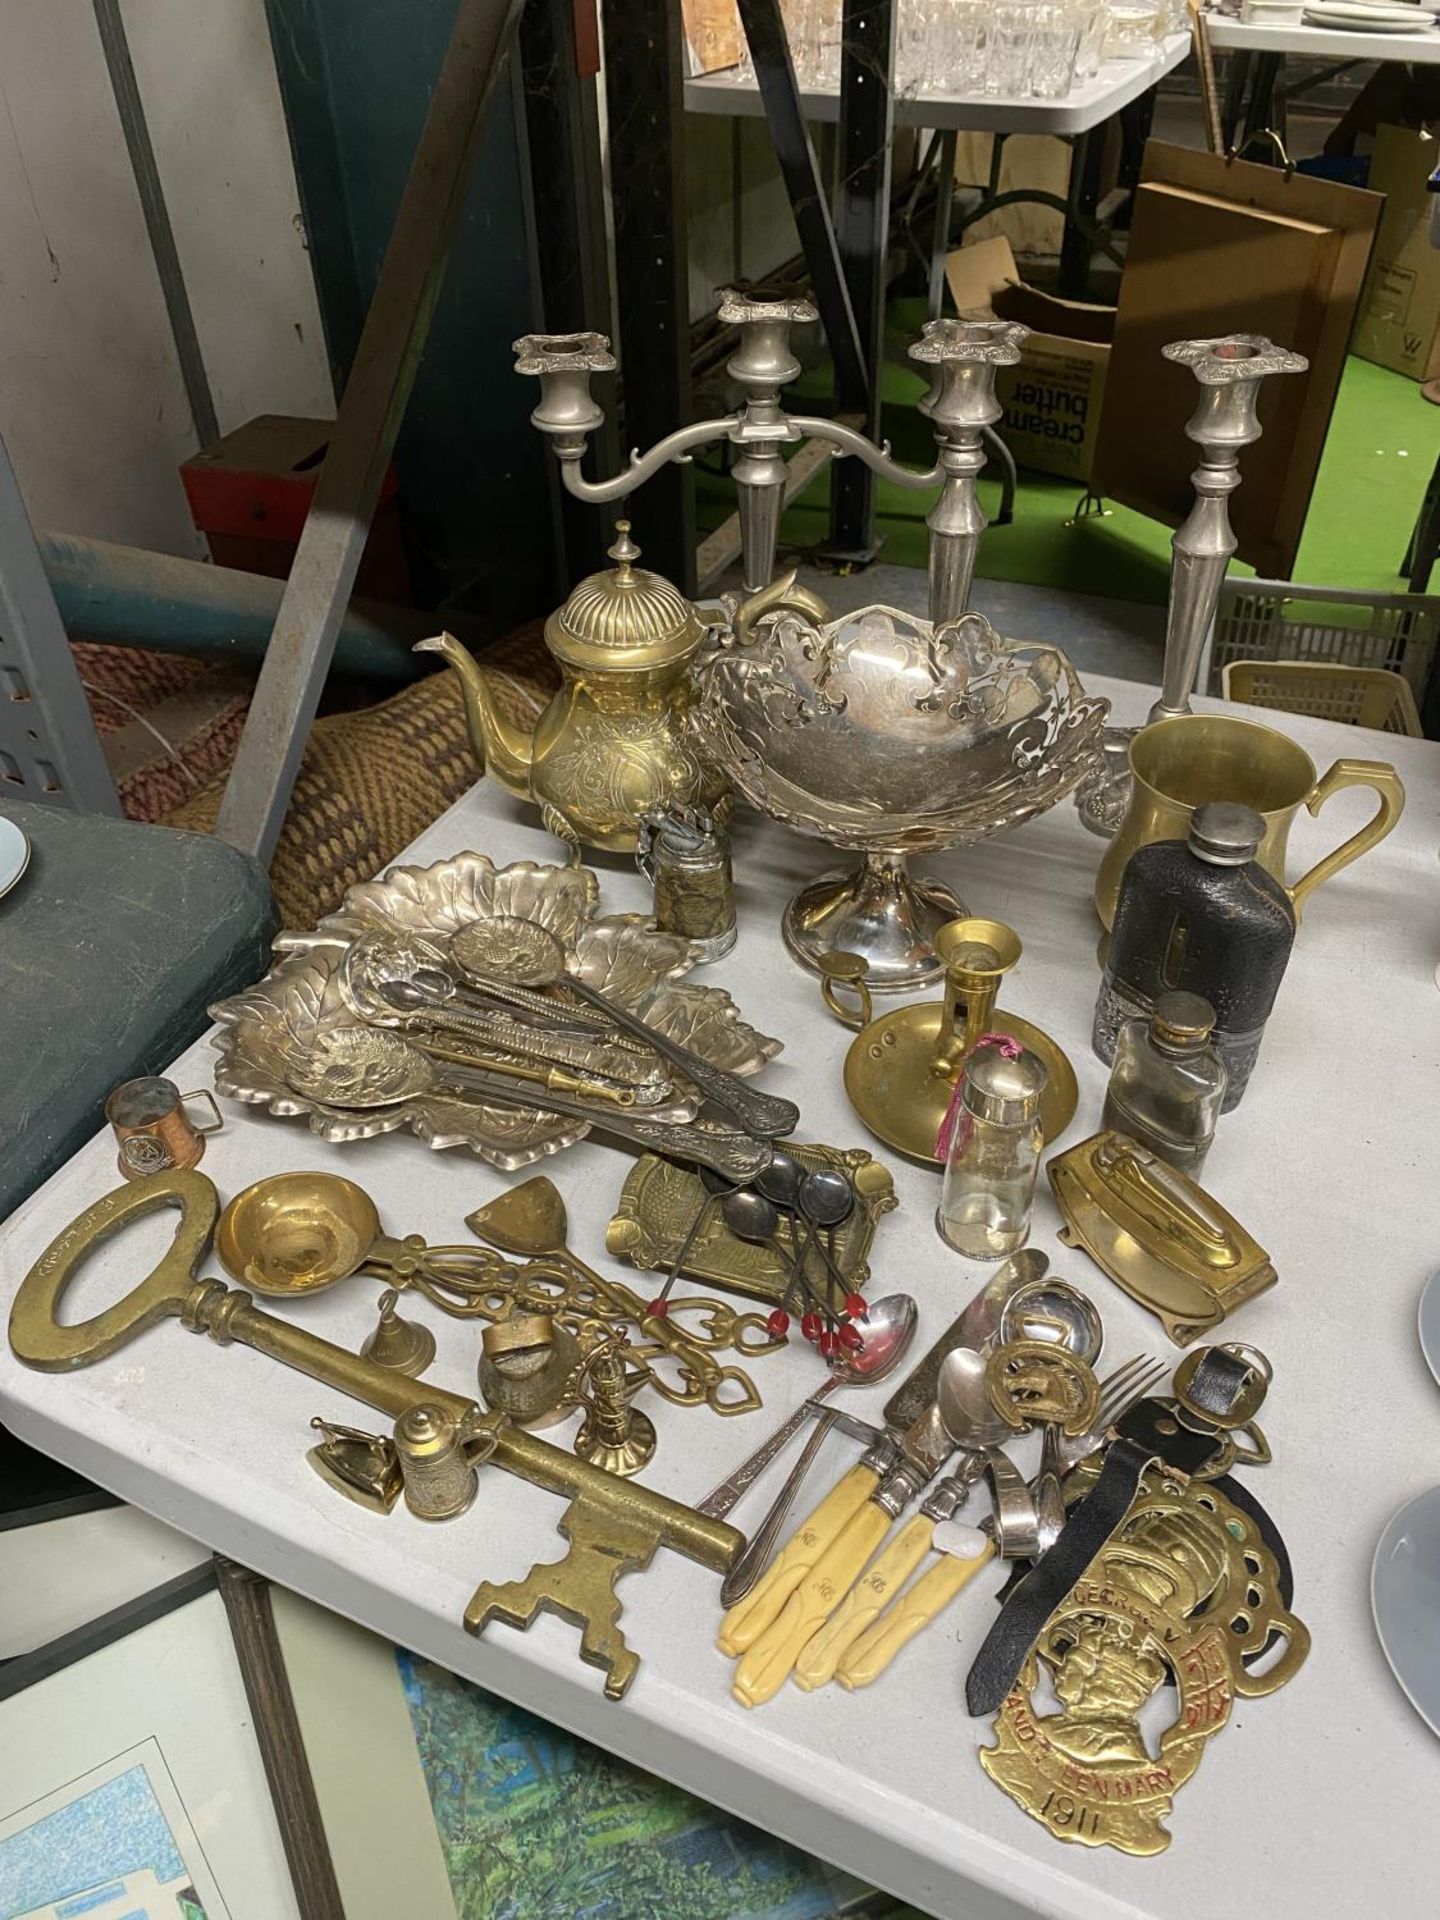 A LARGE AMMOUNT OF BRASS AND SILVER PLATE TO INCLUDE CANDLESTICKS, TAZZA DISH, FLATWARE, HIP FLASKS,